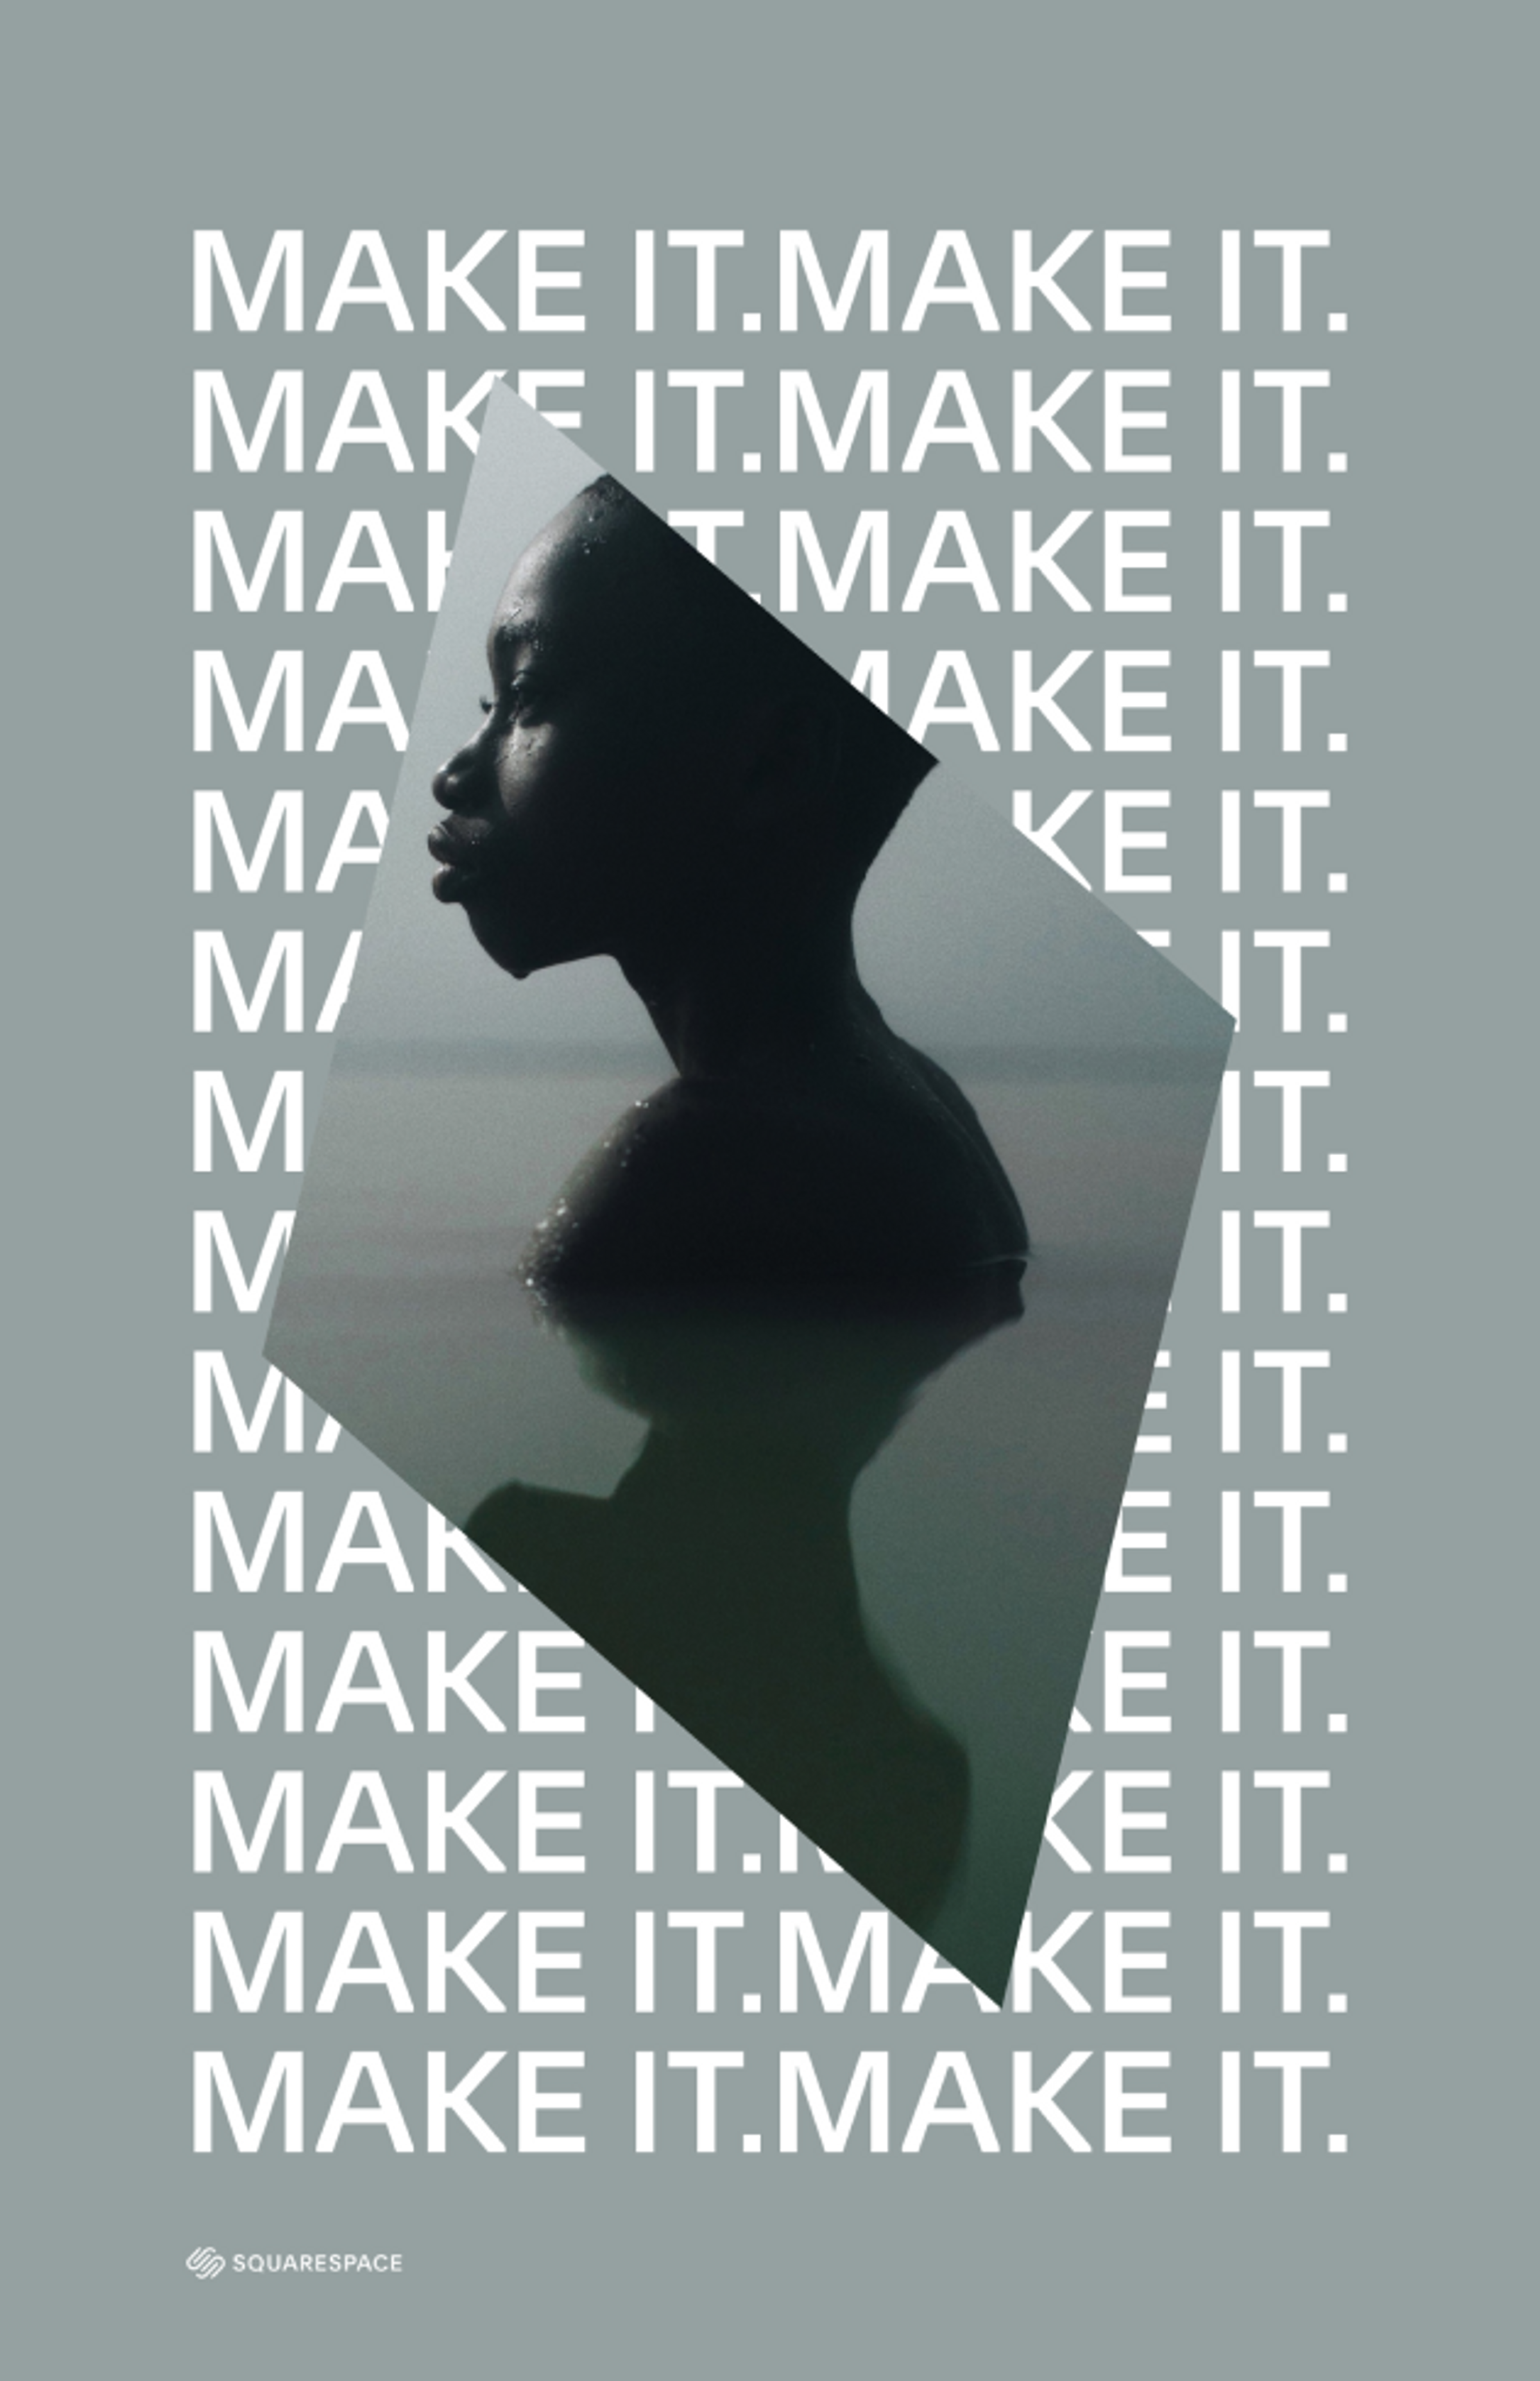 A Squarespace branded poster reading "Make it"